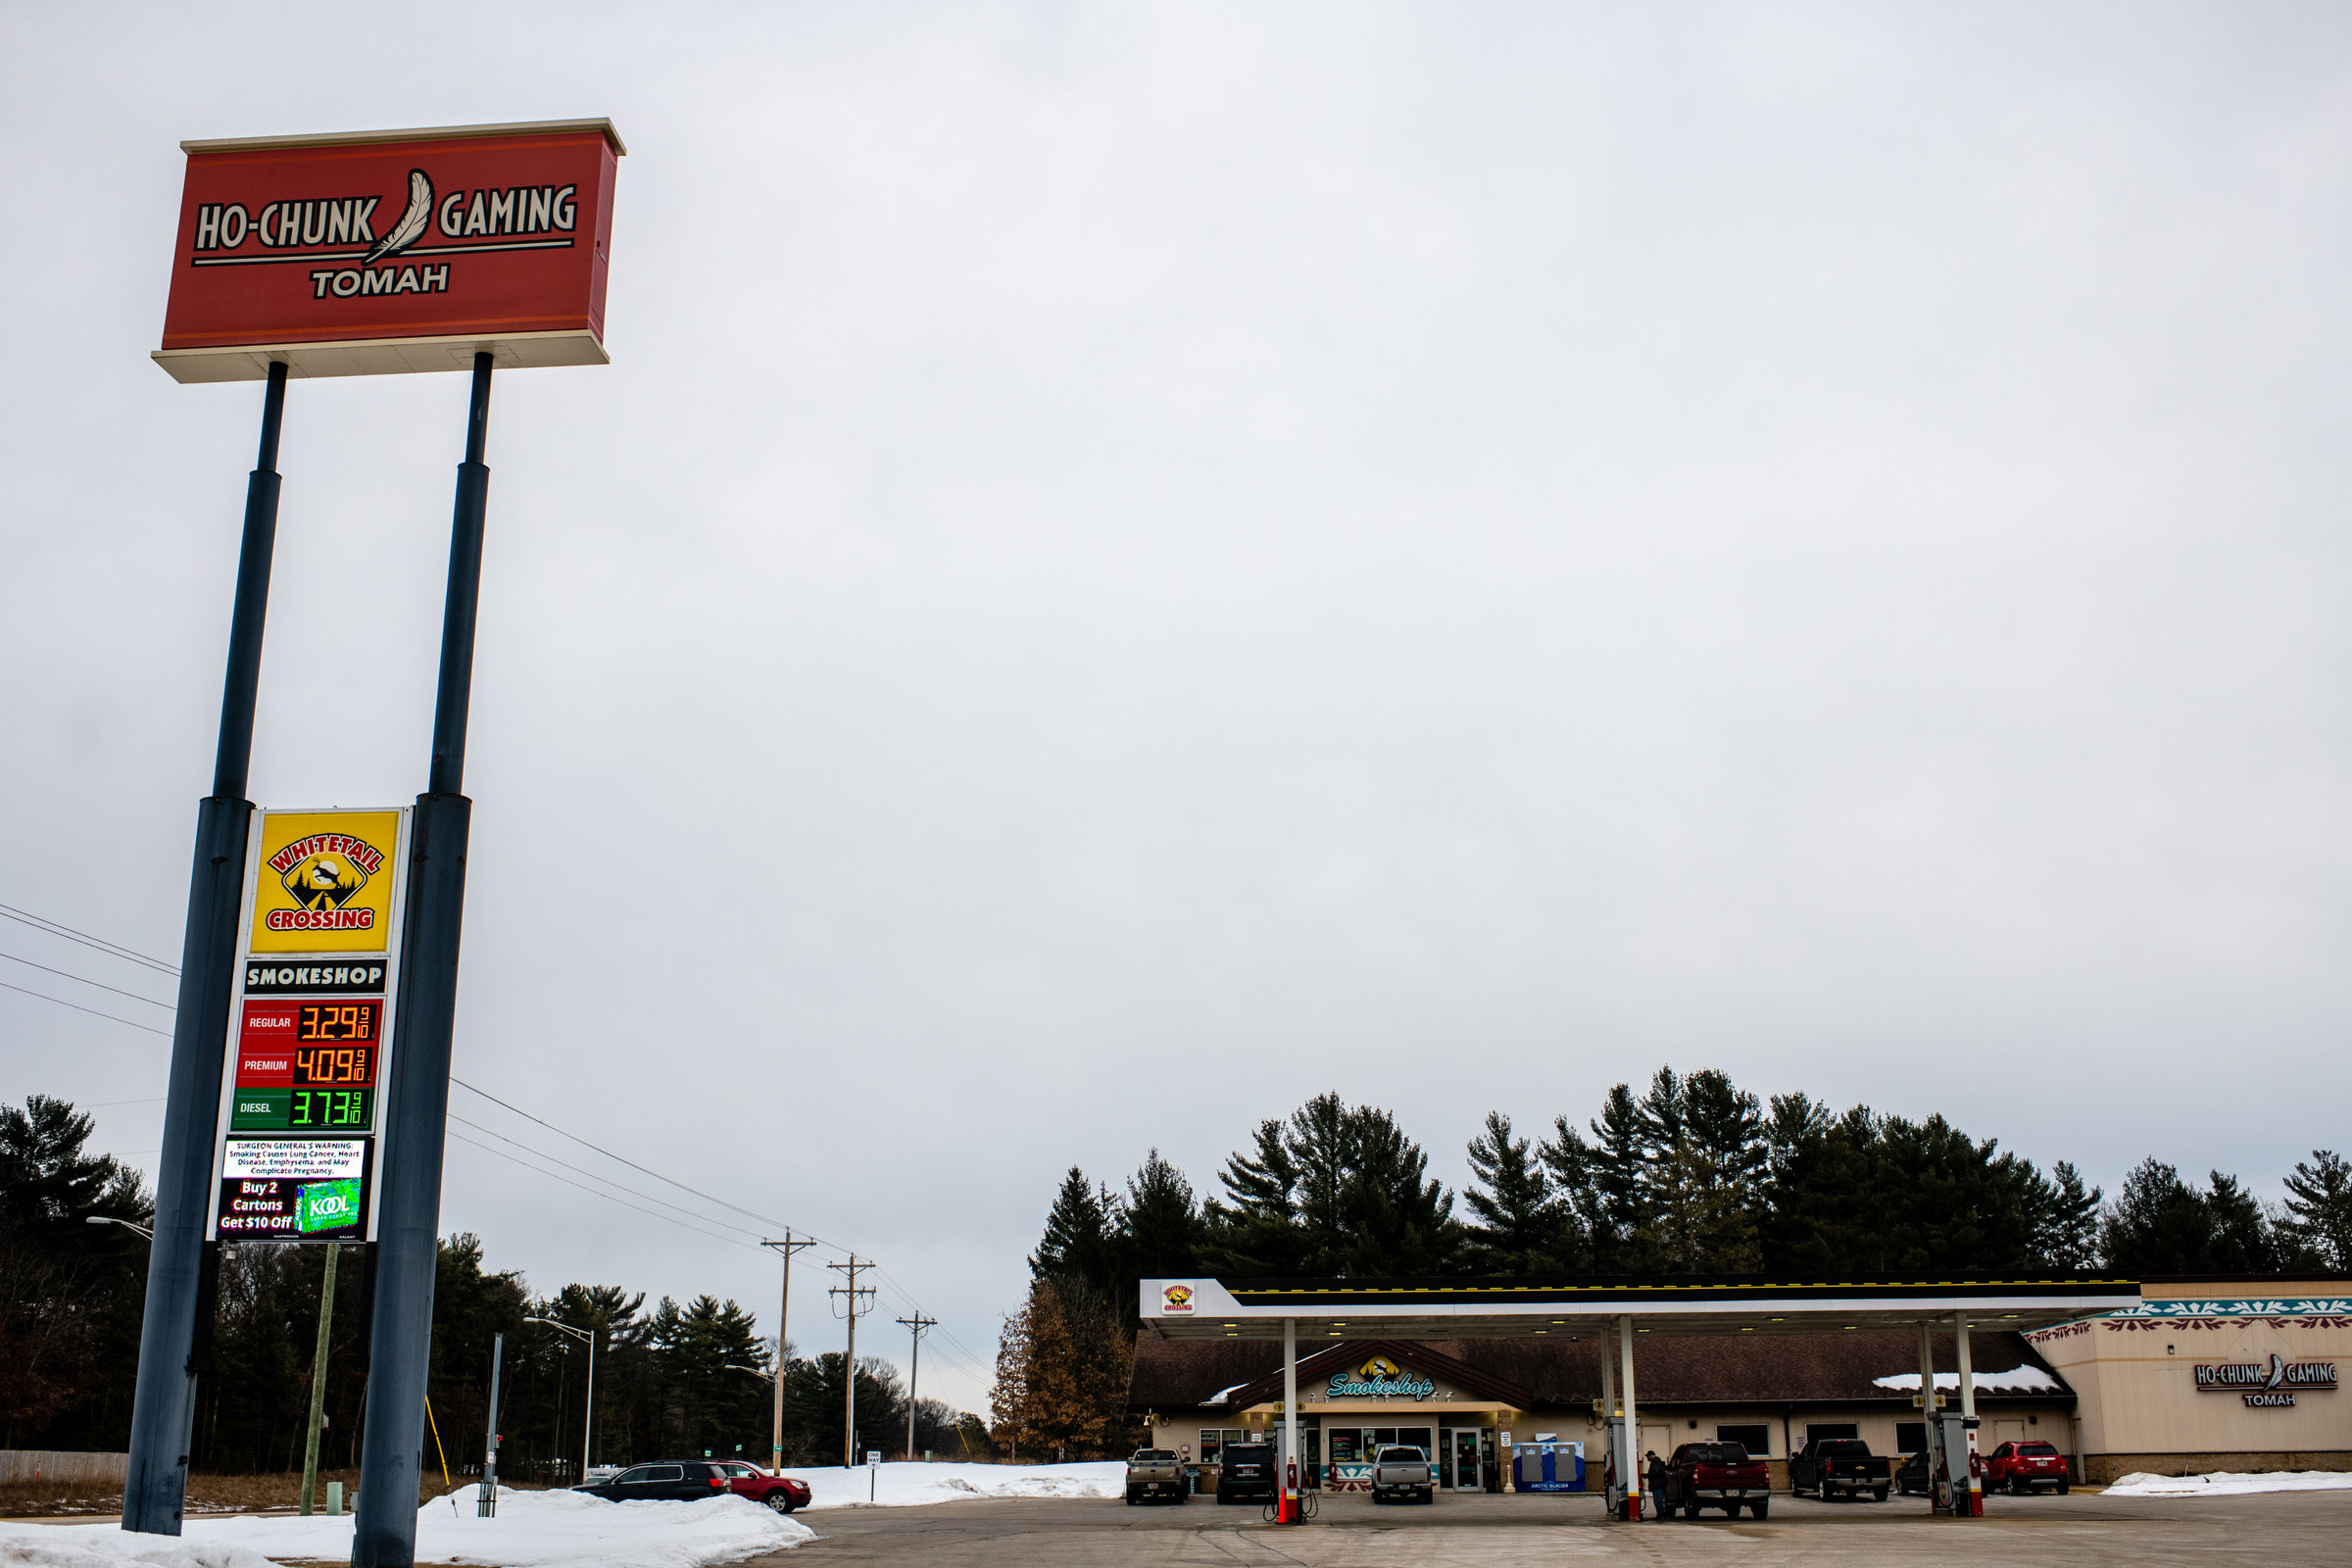 Ho-Chunk Gaming Tomah is seen in Tomah, Wis.